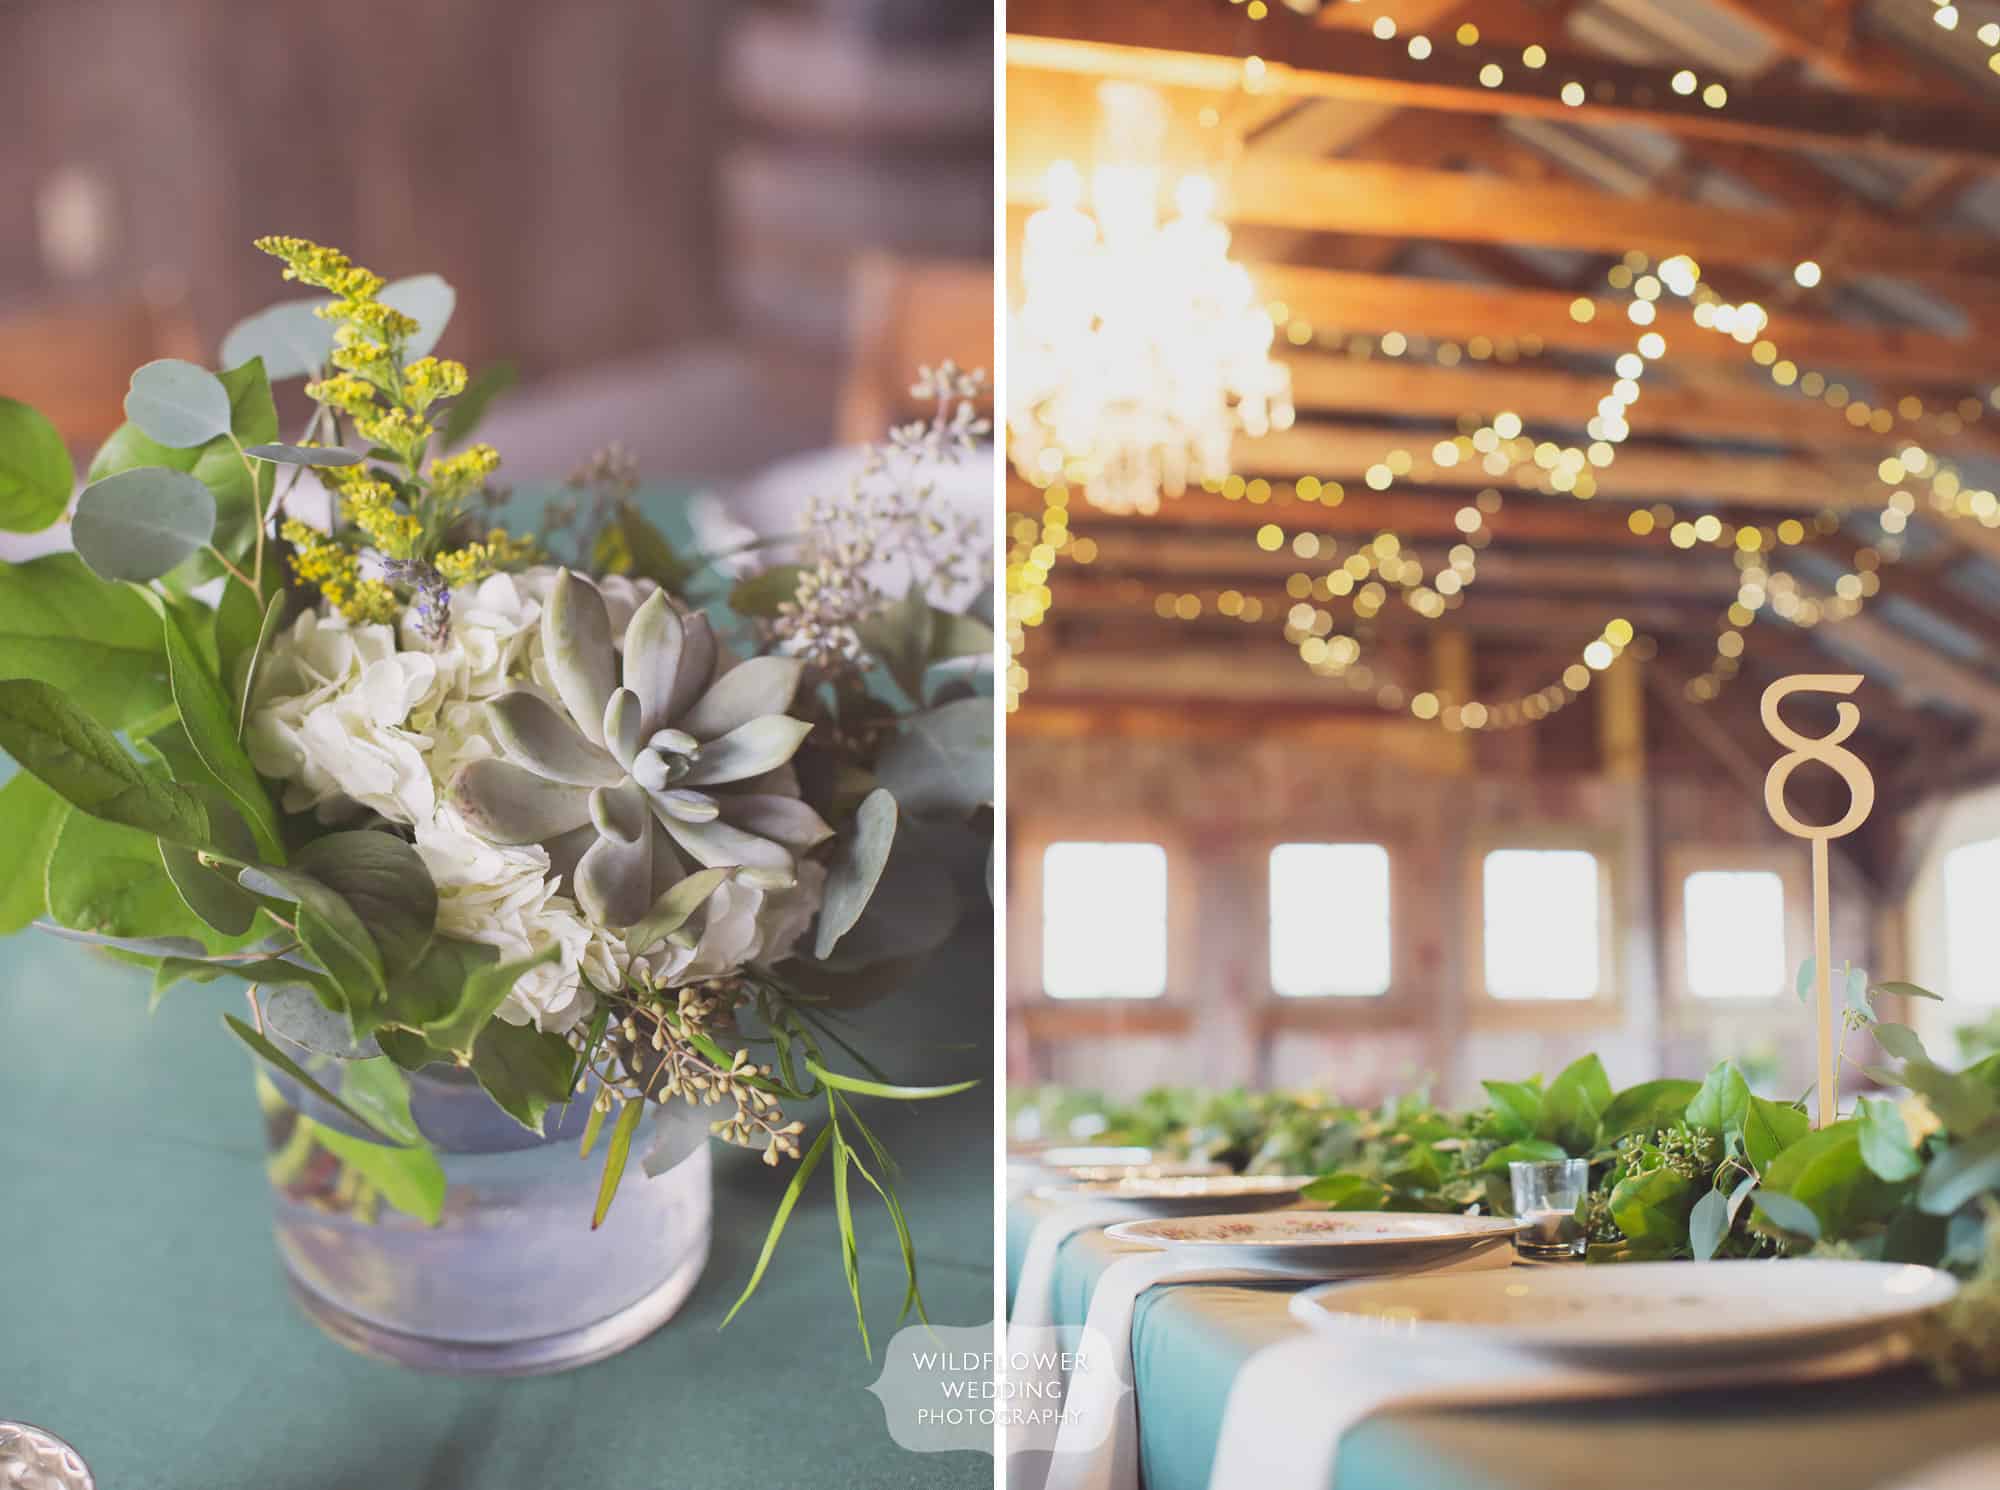 Romantic barn wedding decor ideas like succulents and laser cut wooden table numbers.